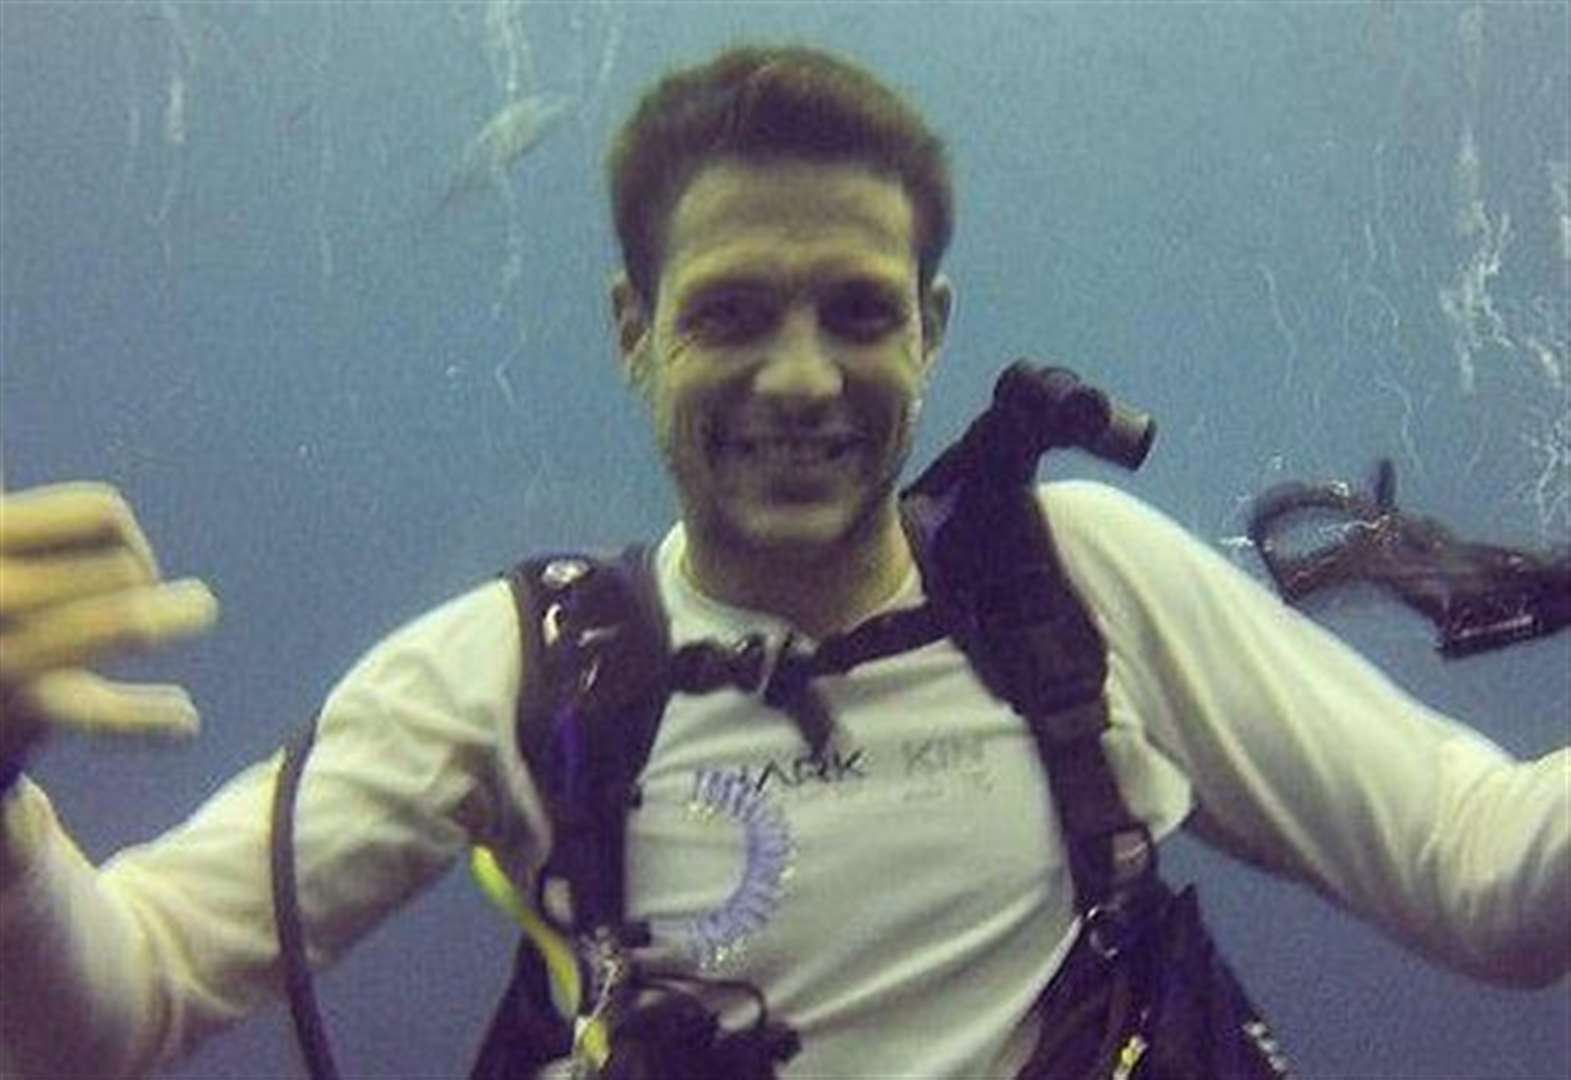 Diver killed in shark attack 'would not want creature to die'